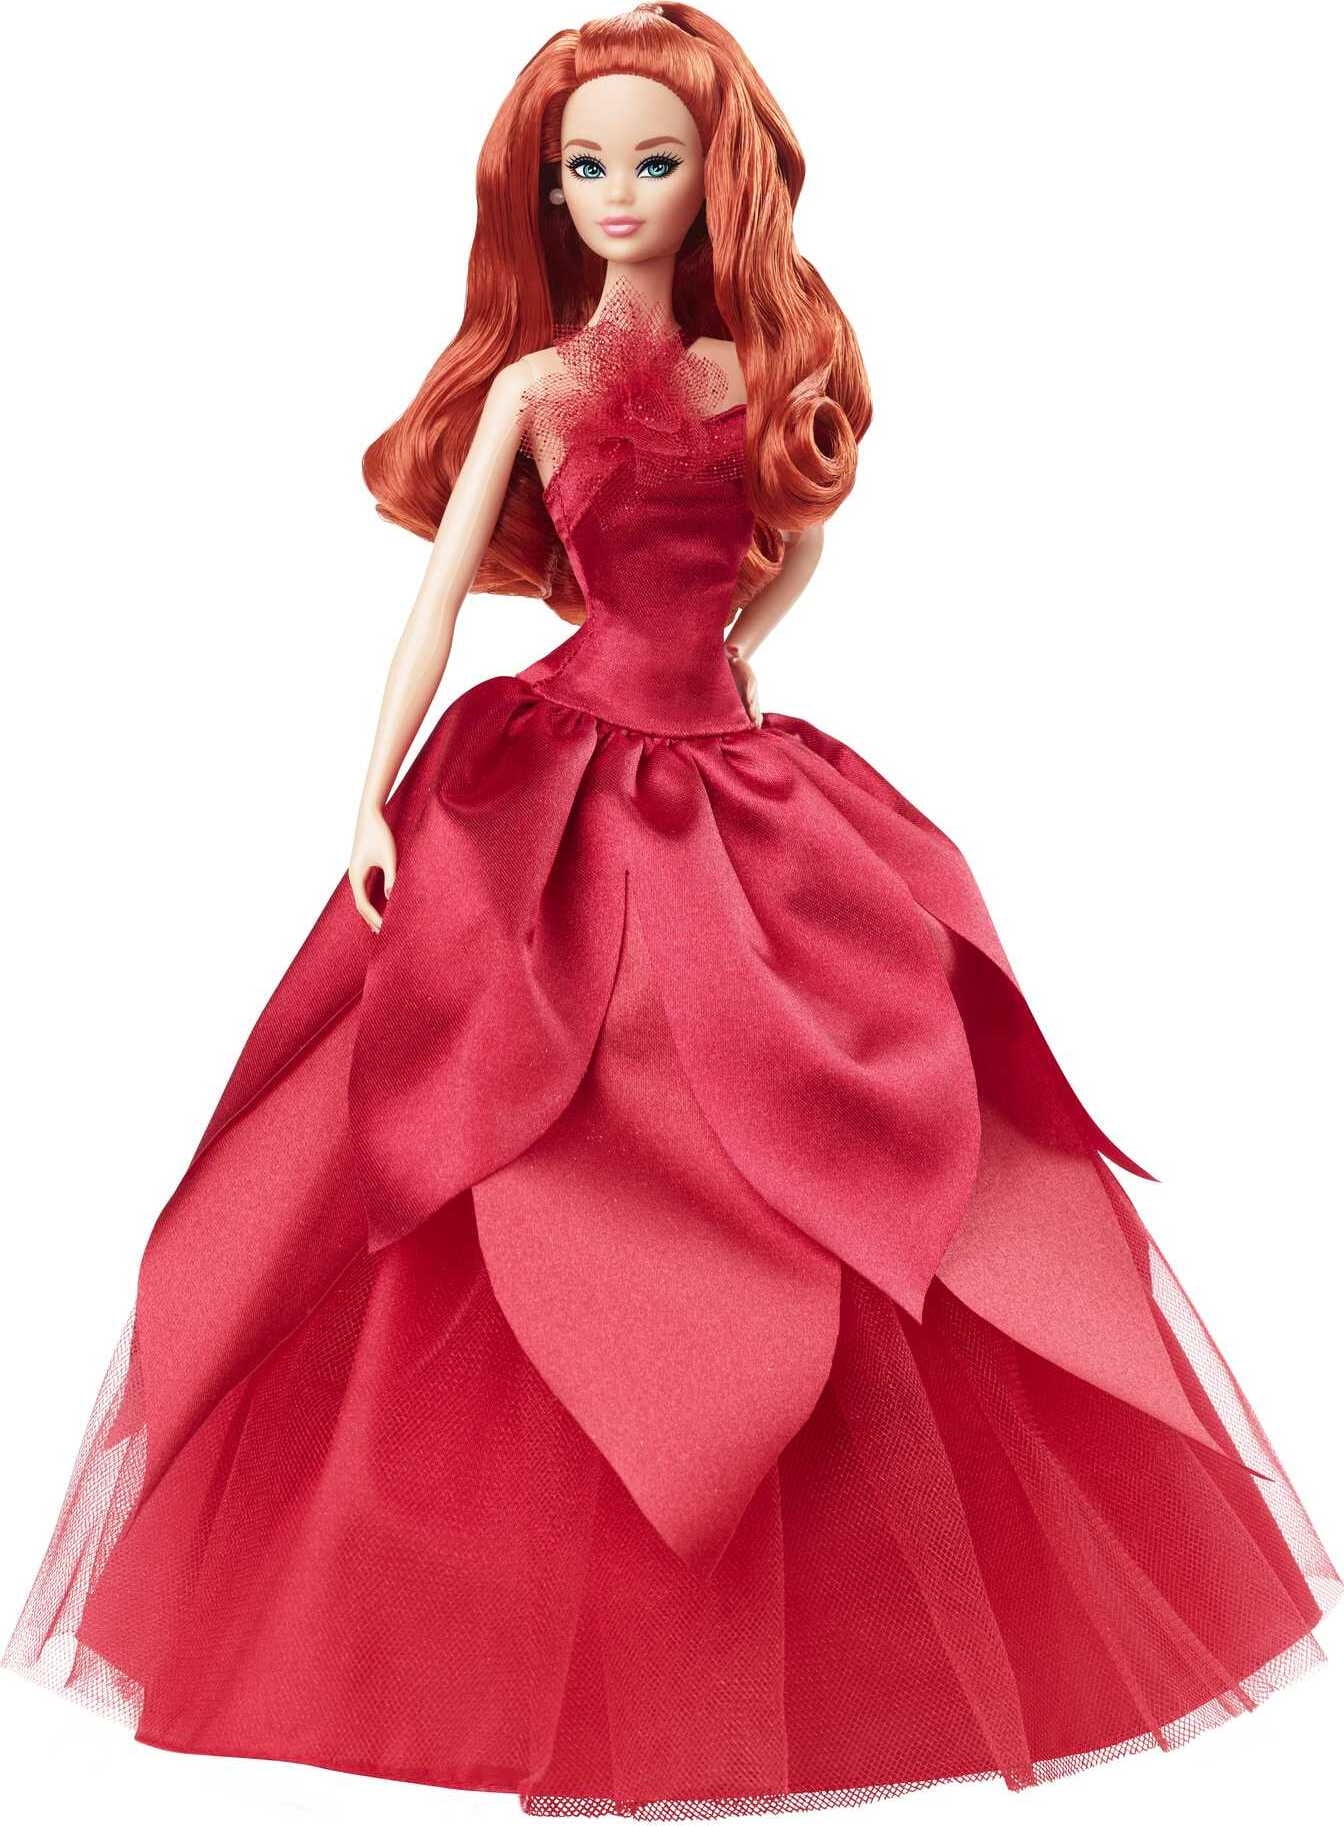 Barbie Signature 2022 Holiday Barbie Doll (Red Hair), 6 Years and